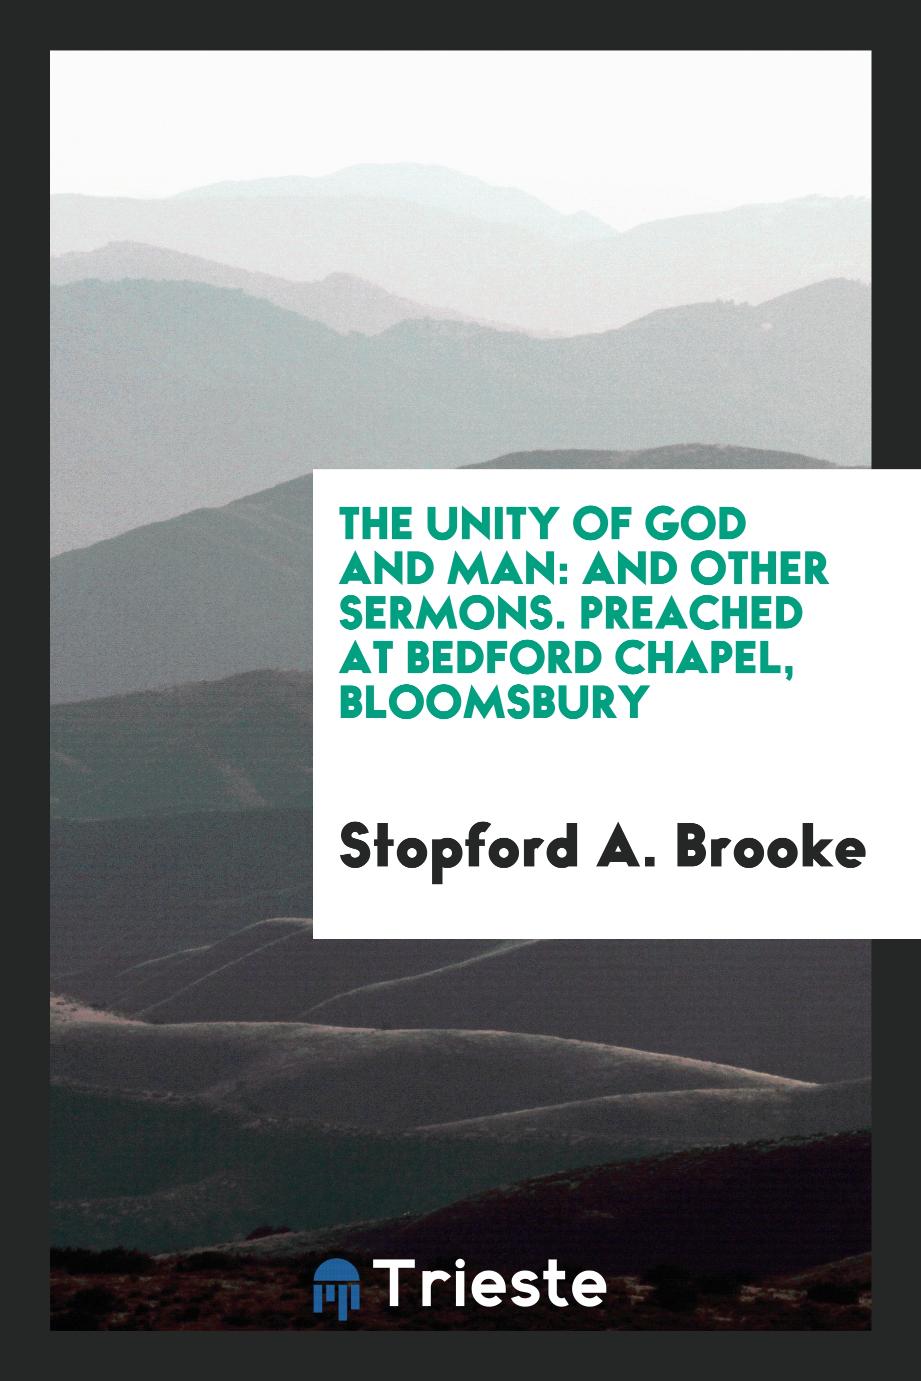 The Unity of God and Man: And Other Sermons. Preached at Bedford Chapel, Bloomsbury